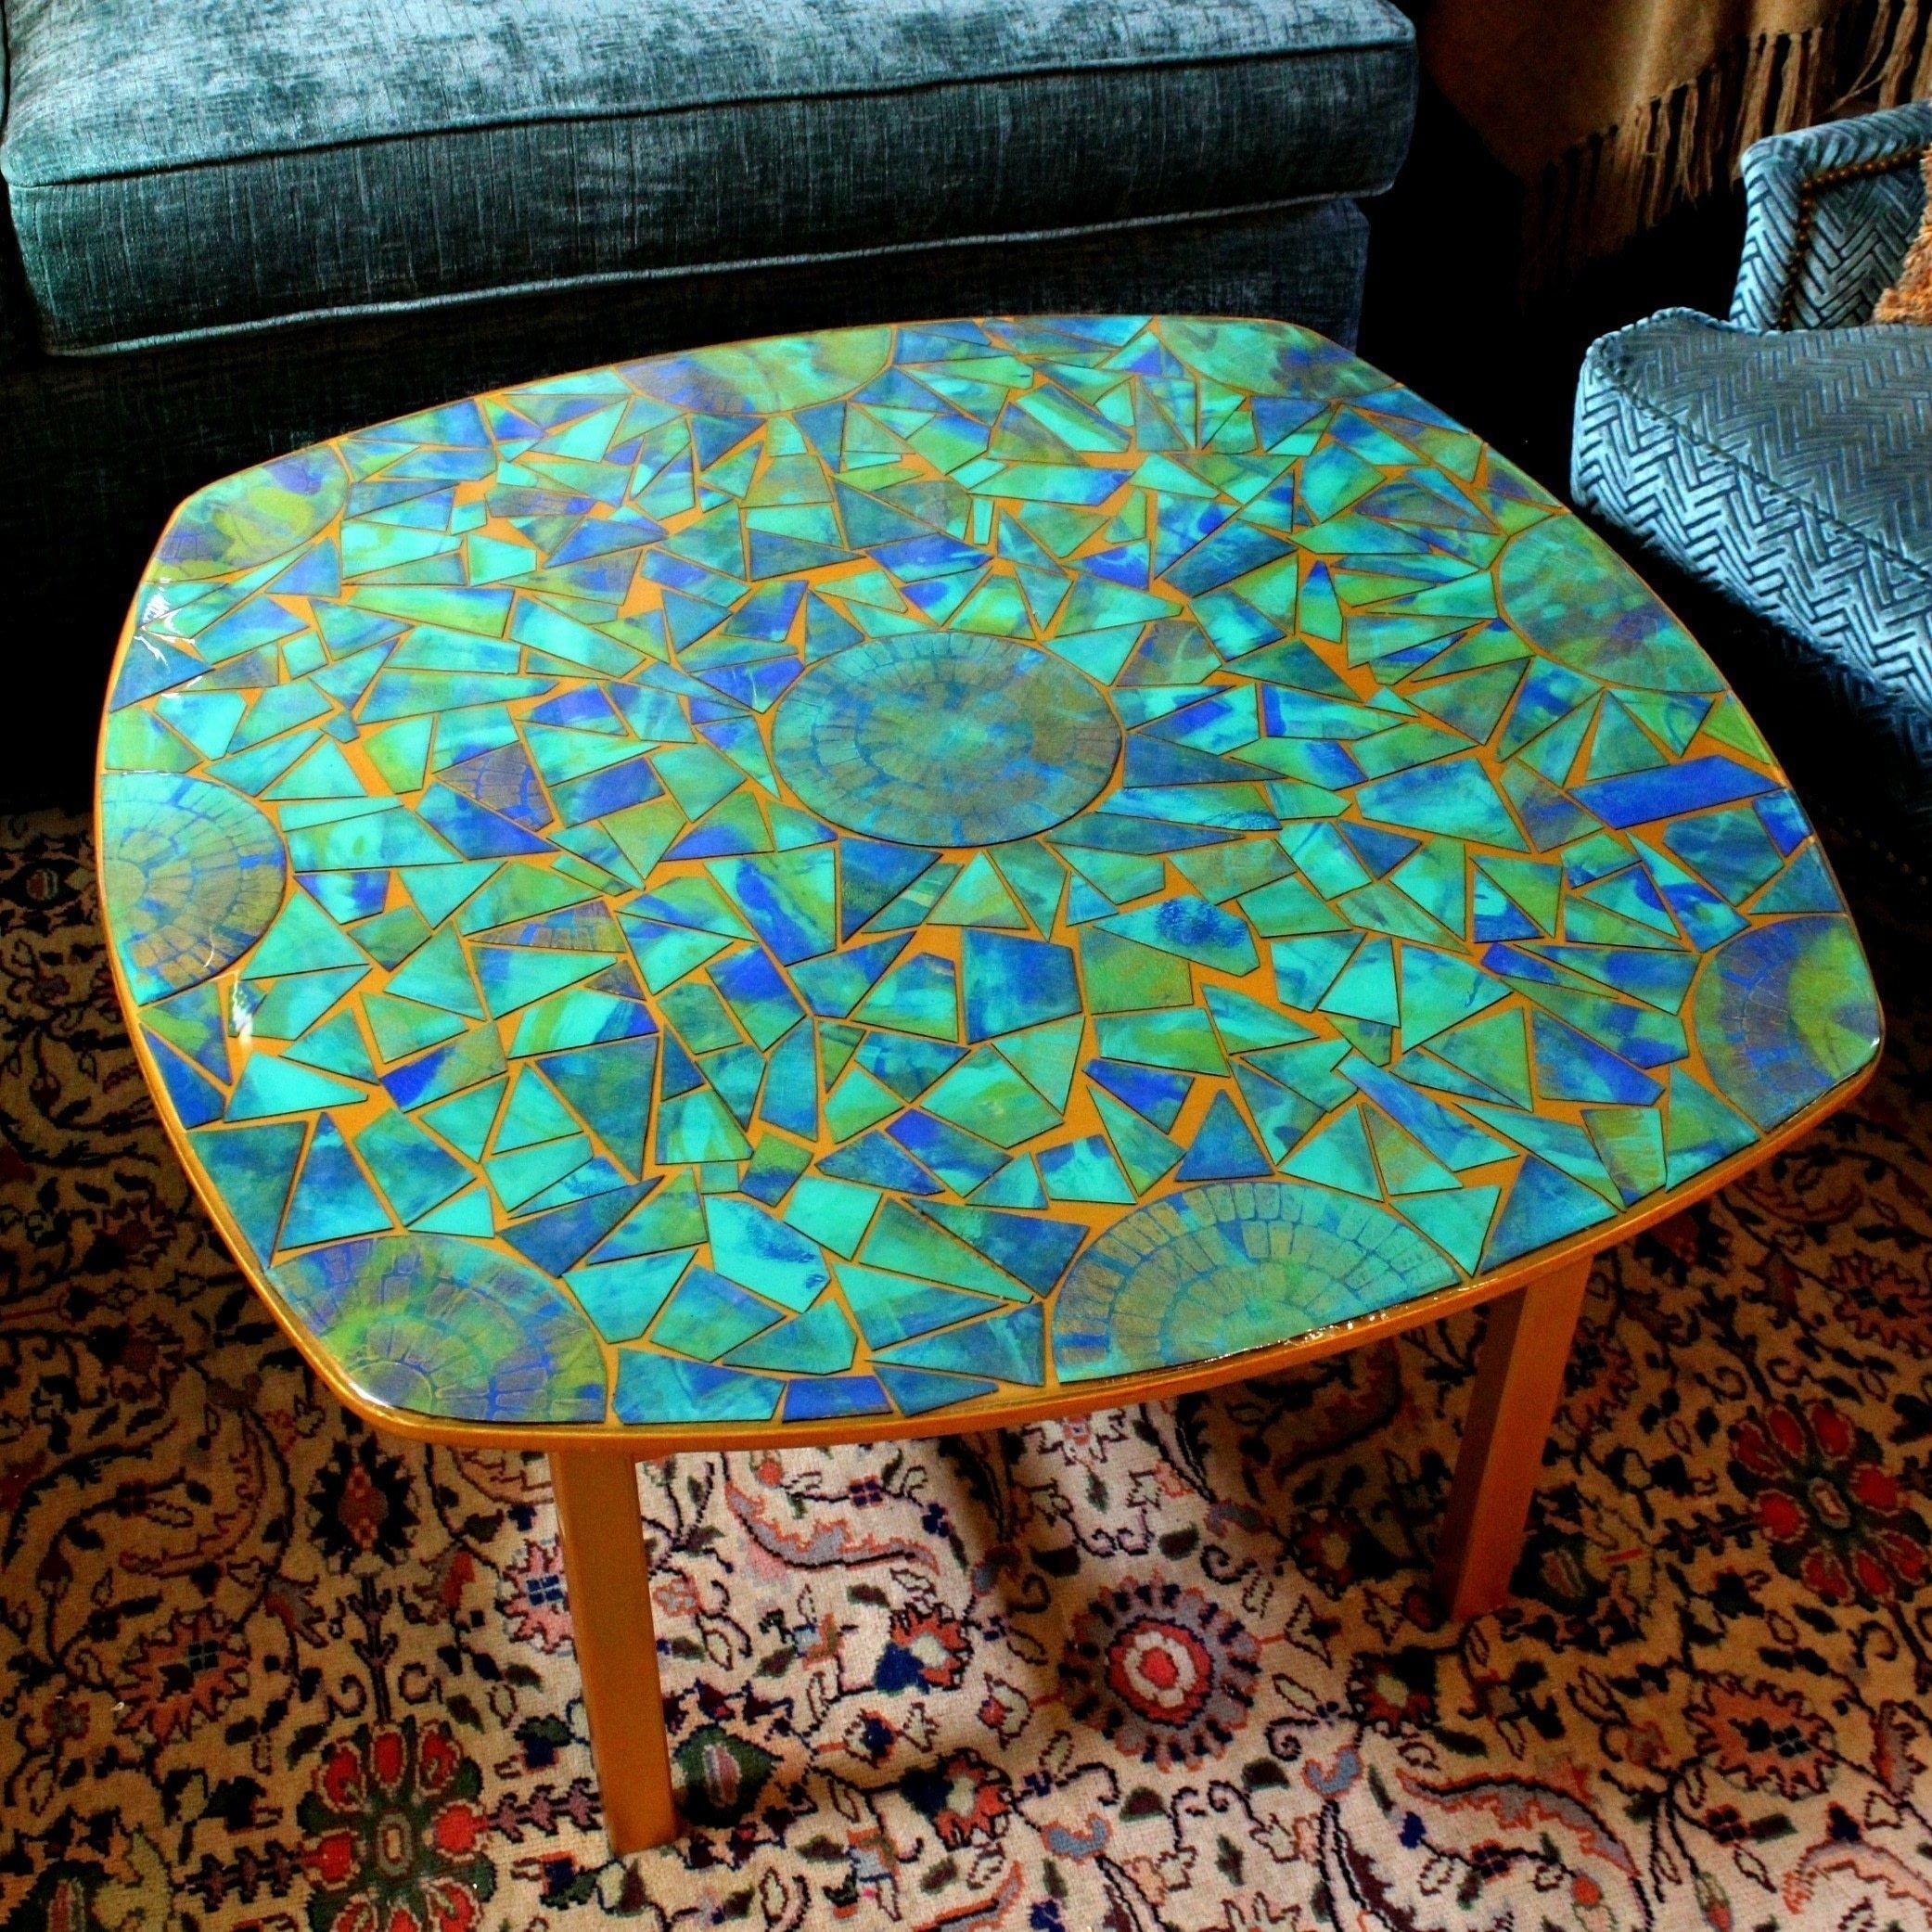 Tile And Glass Mosaic Tables